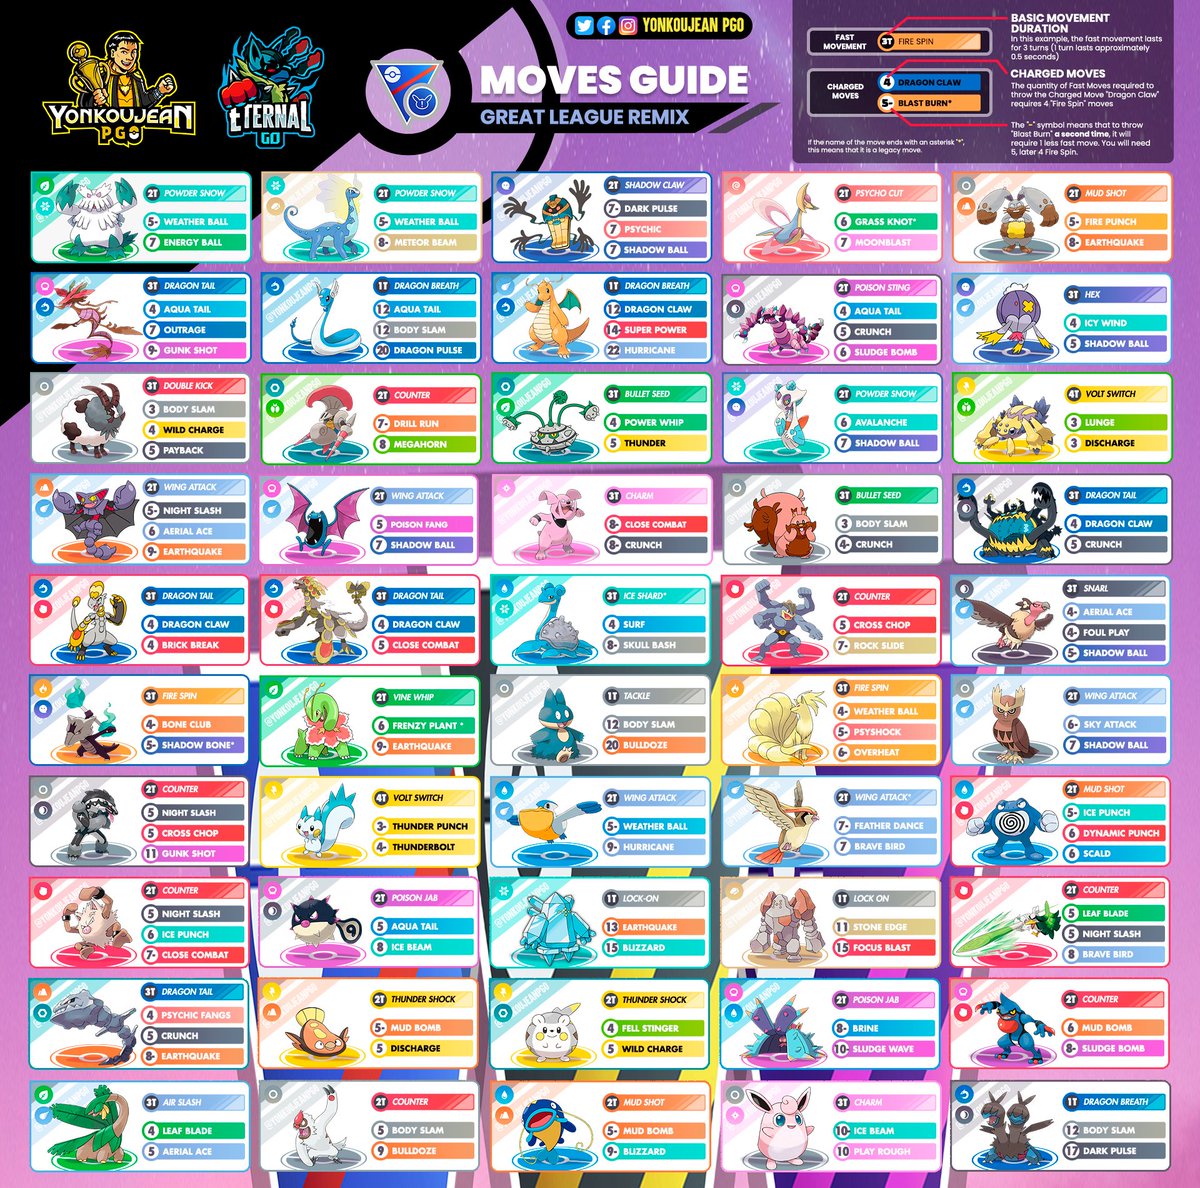 Great League Remix - Moves Guide - Go Battle League Season 13. 
The moveset are recommended by PVPoke
Good luck in your battles! 
#GreatLeagueRemix #GOBattleLeague #GBL #PokemonGO #pokemon